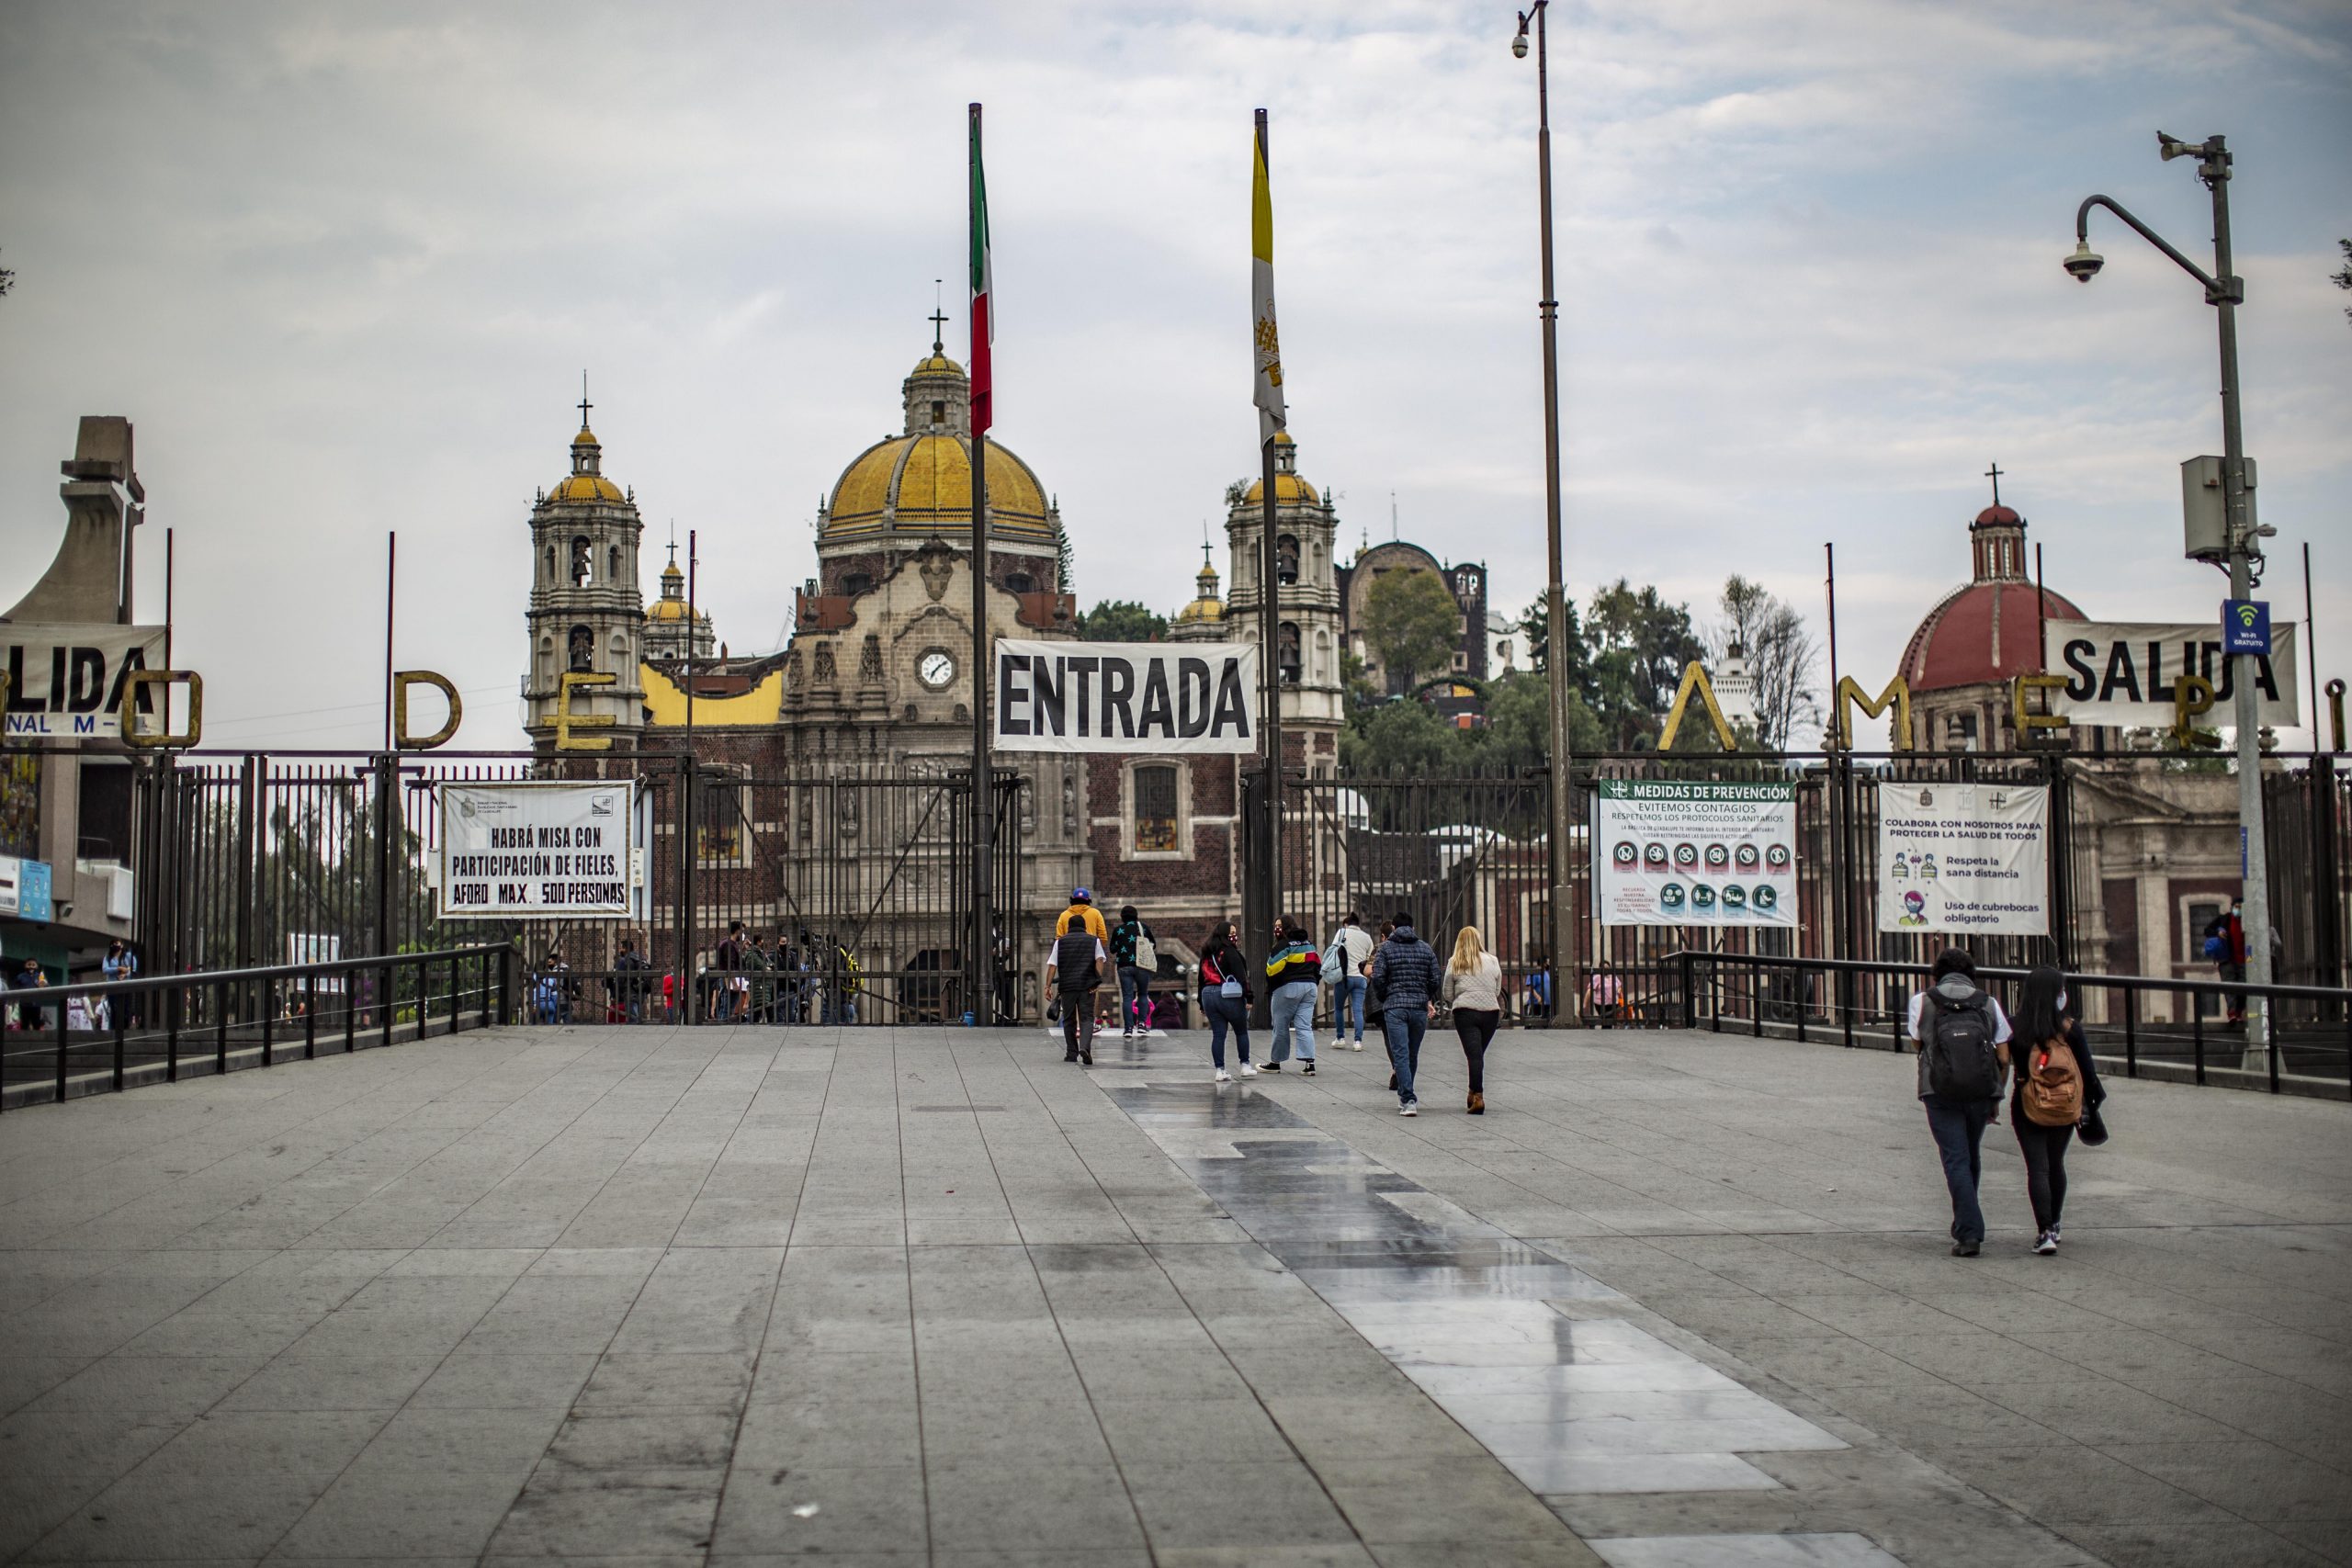 Pilgrims can reach the Basilica of Guadalupe, but not spend the night there